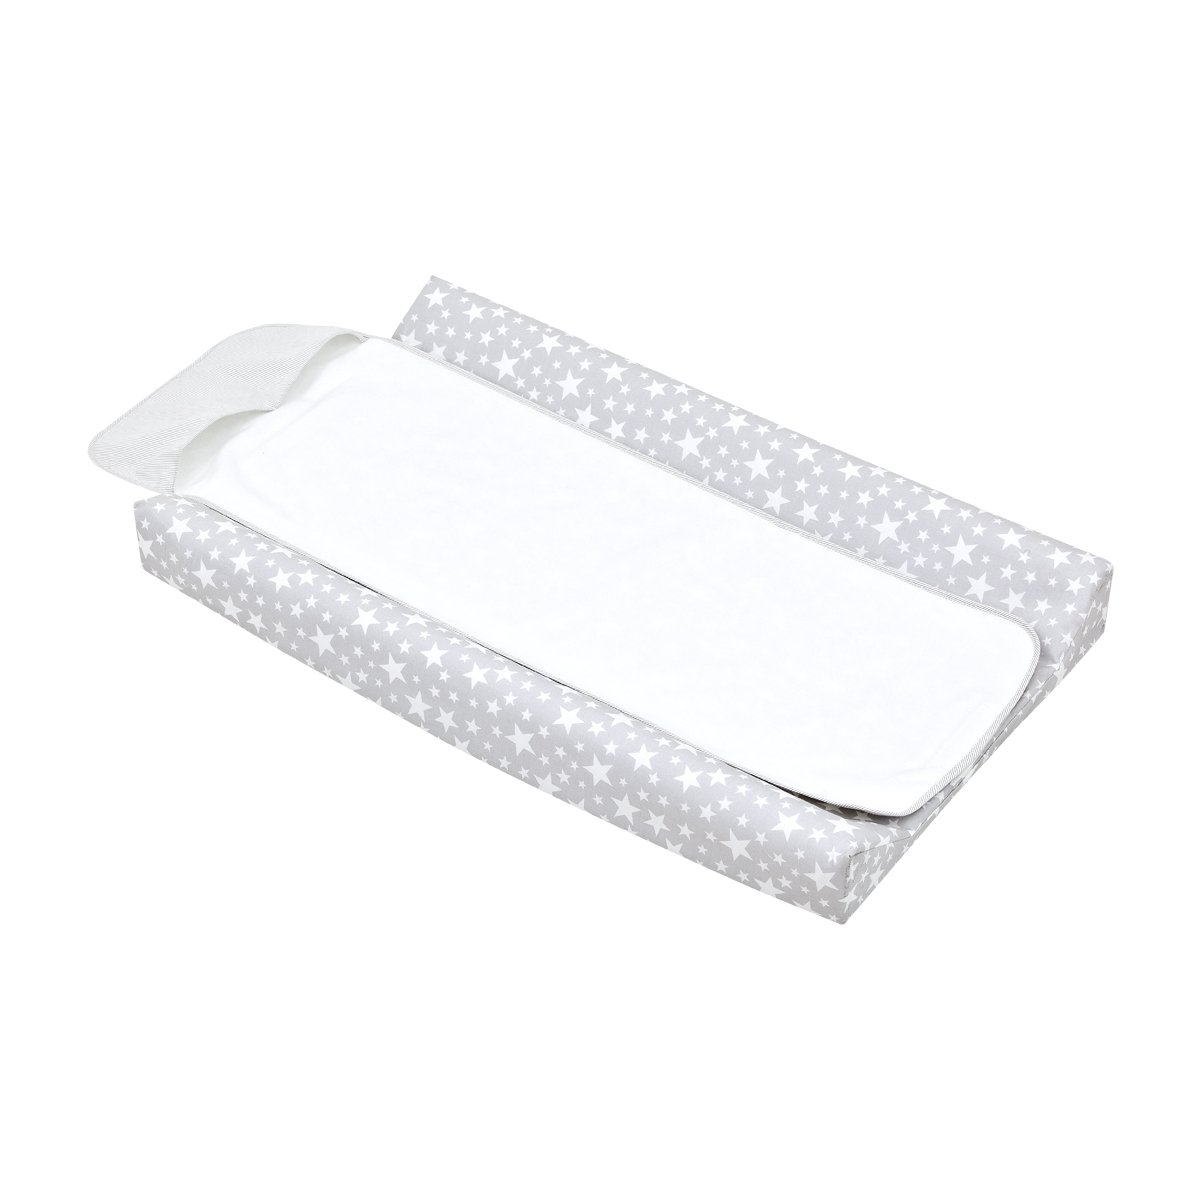 Cambrass 35082 Foam Complete Collection Star Baby Changing Pad, 47 x 80 cm Grey